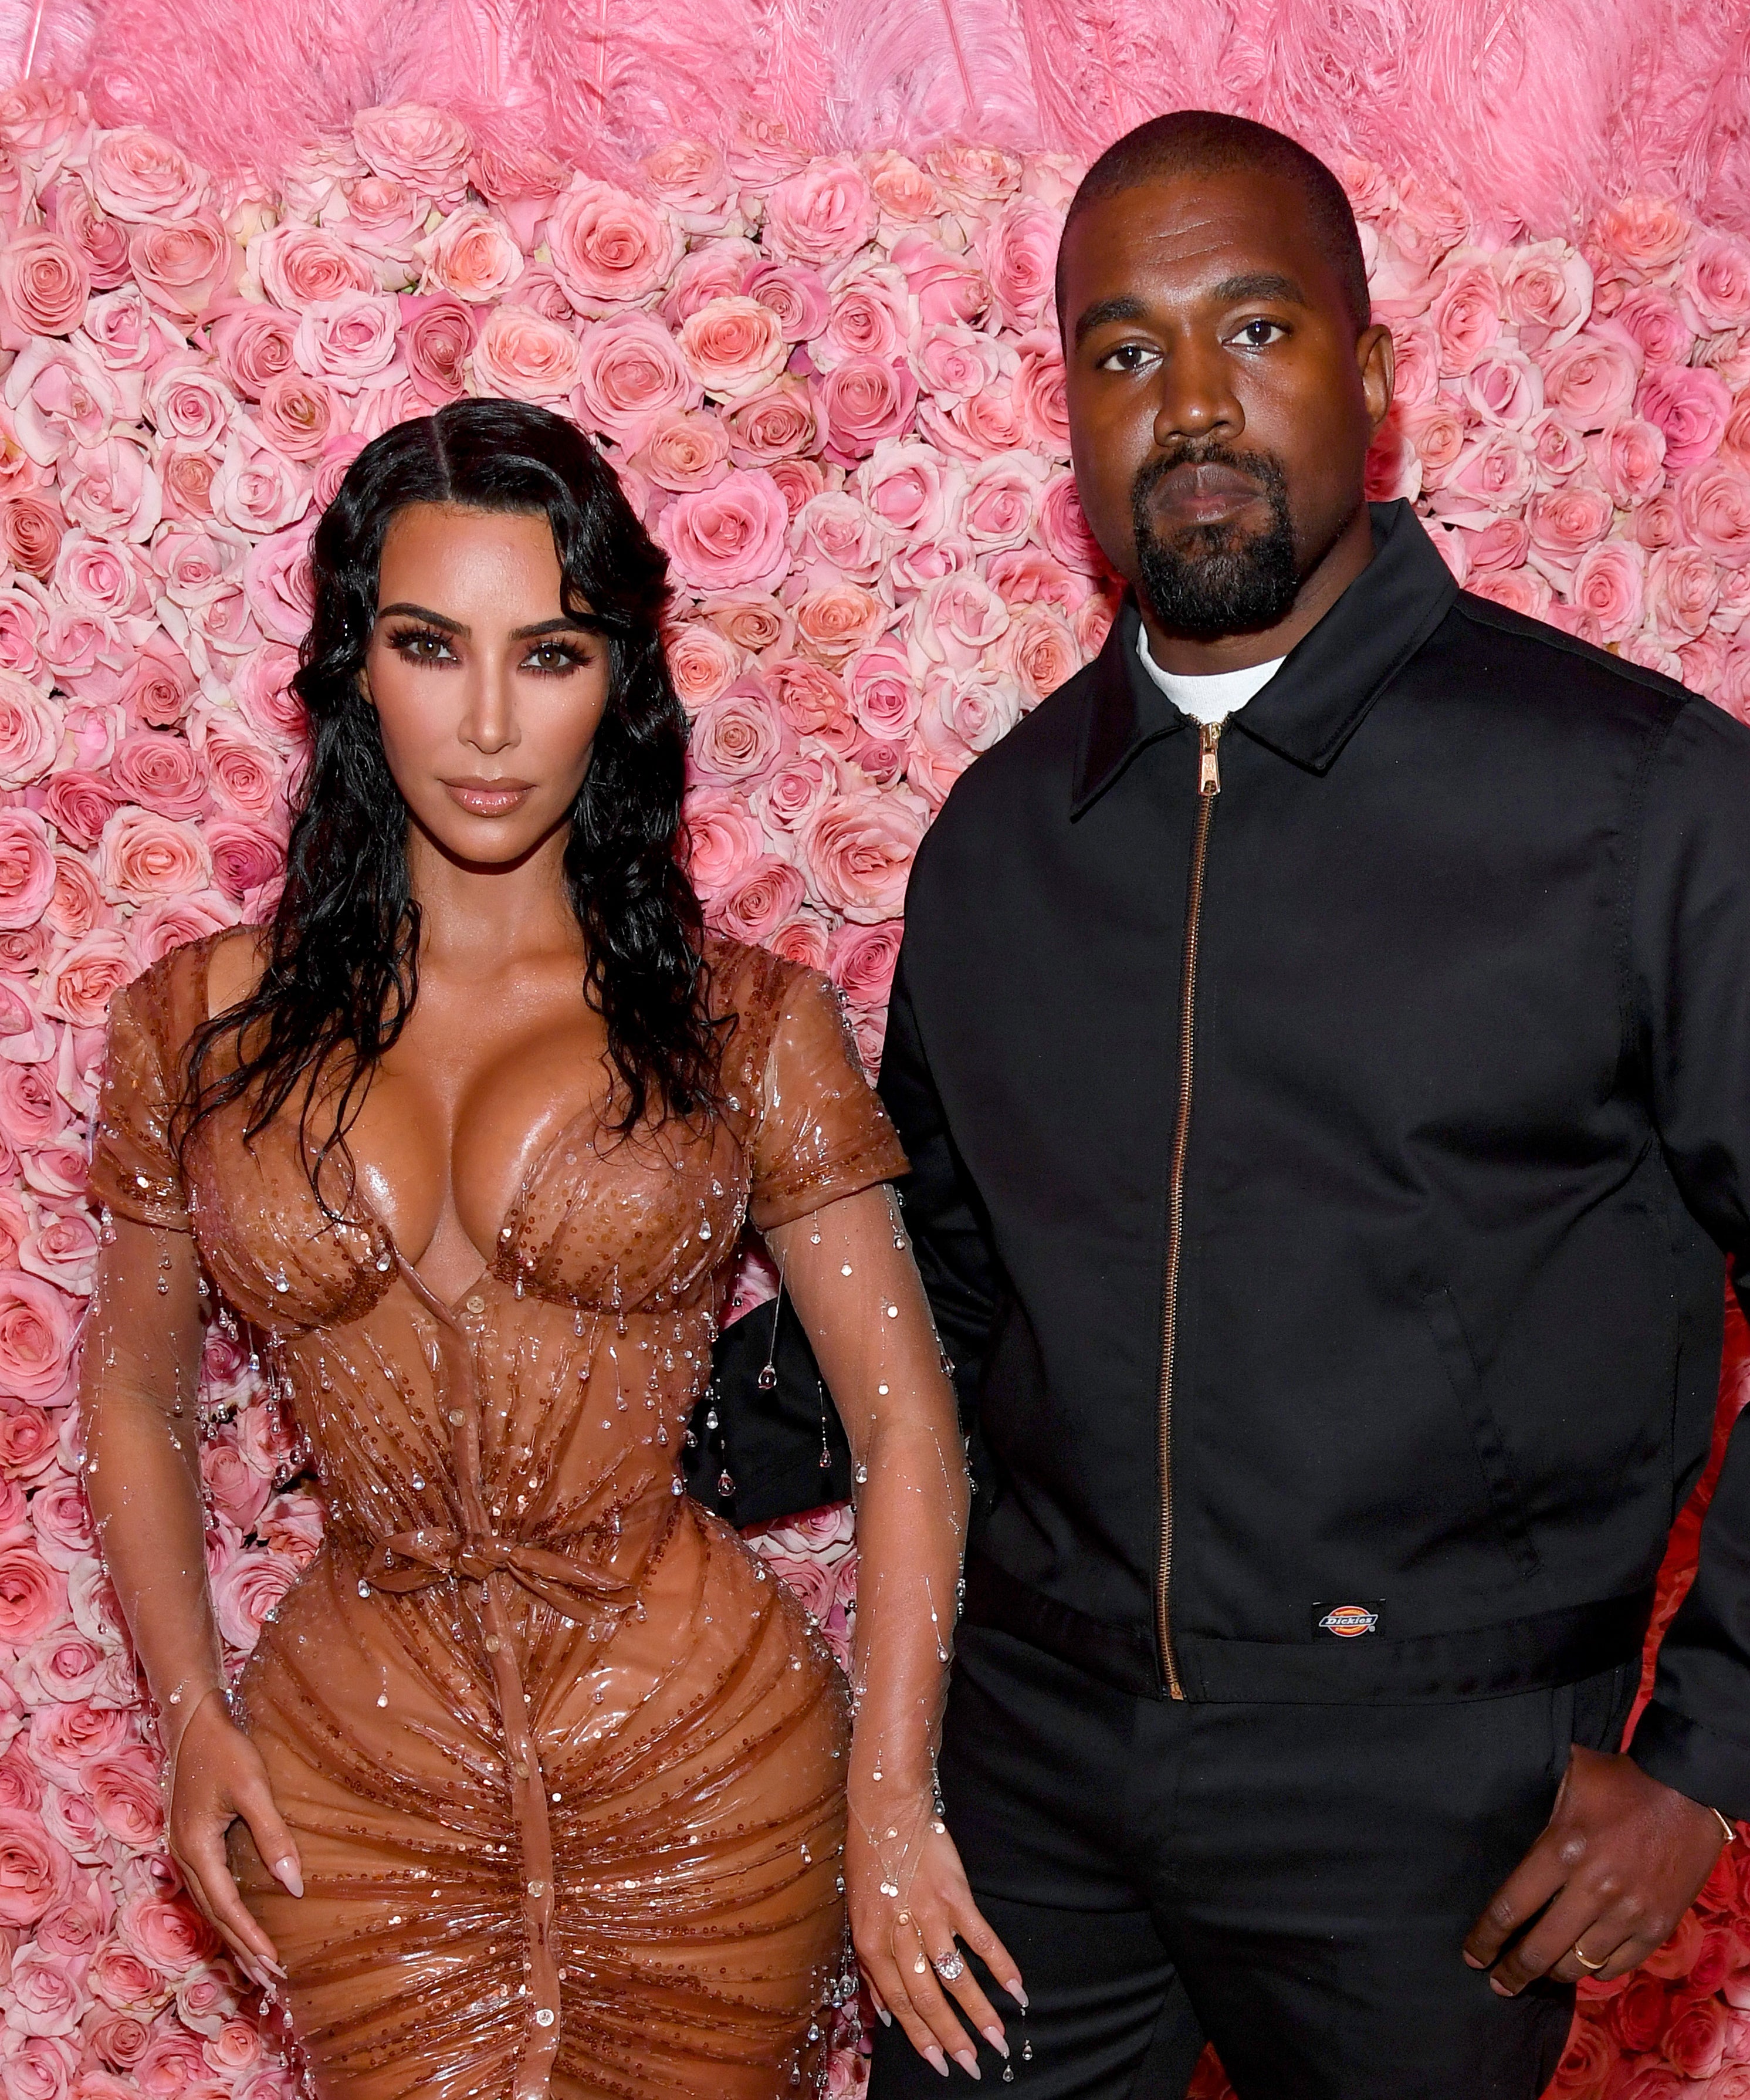 Kim Kardashian and Kanye West Are Reportedly Splitting After 6